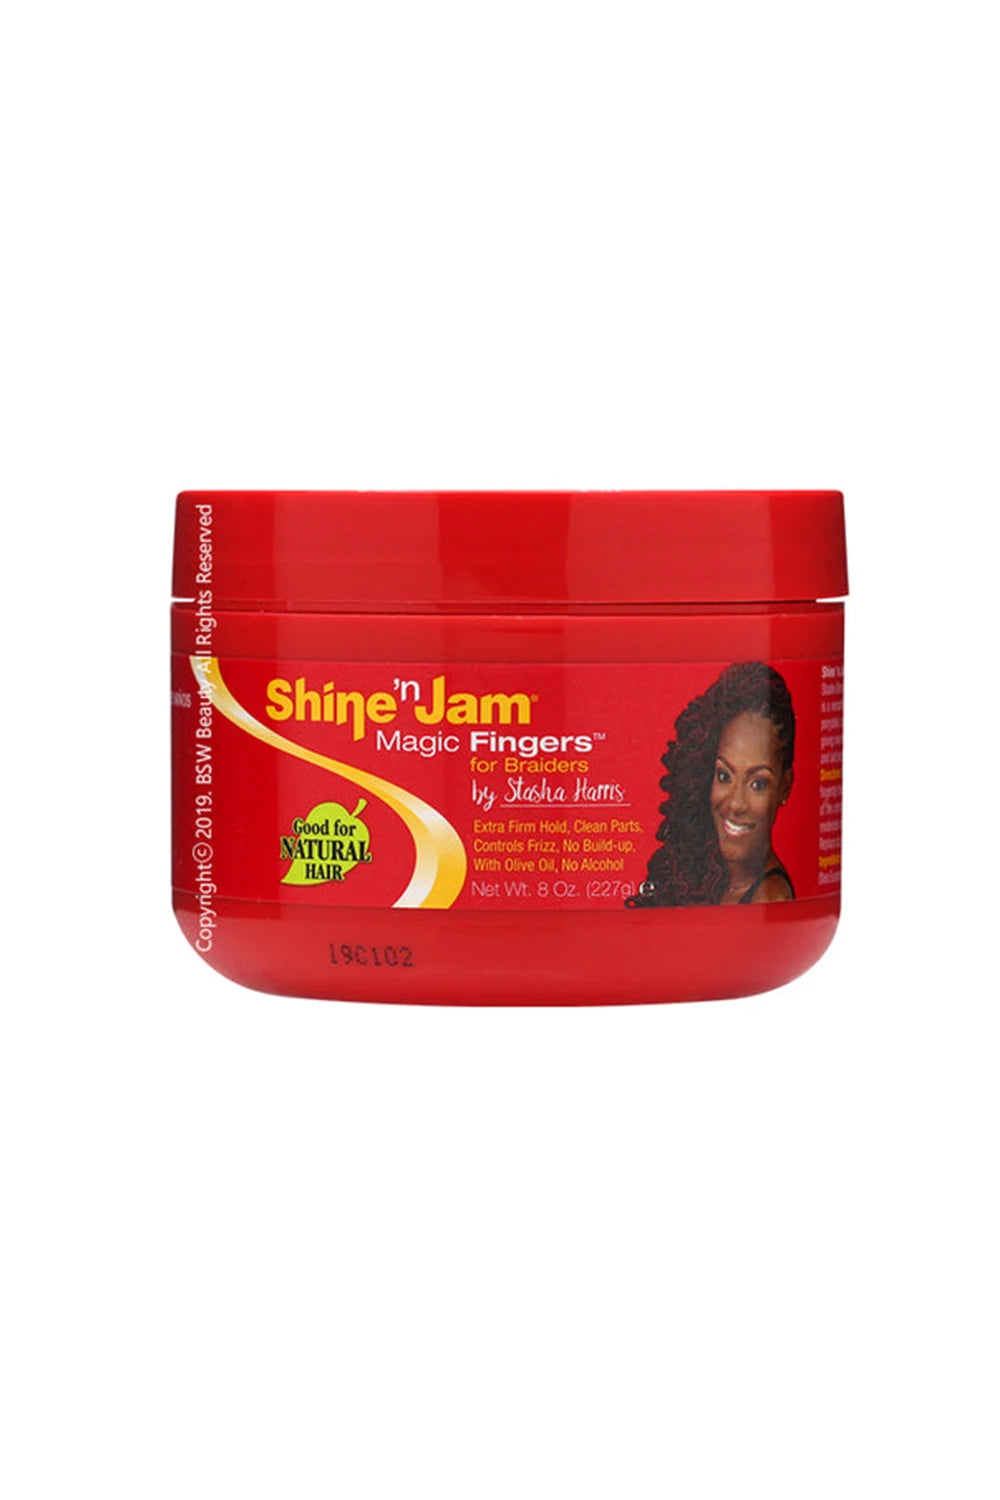 Shine 'n Jam Magic Fingers For Braiders Extra Firm Hold 8Oz